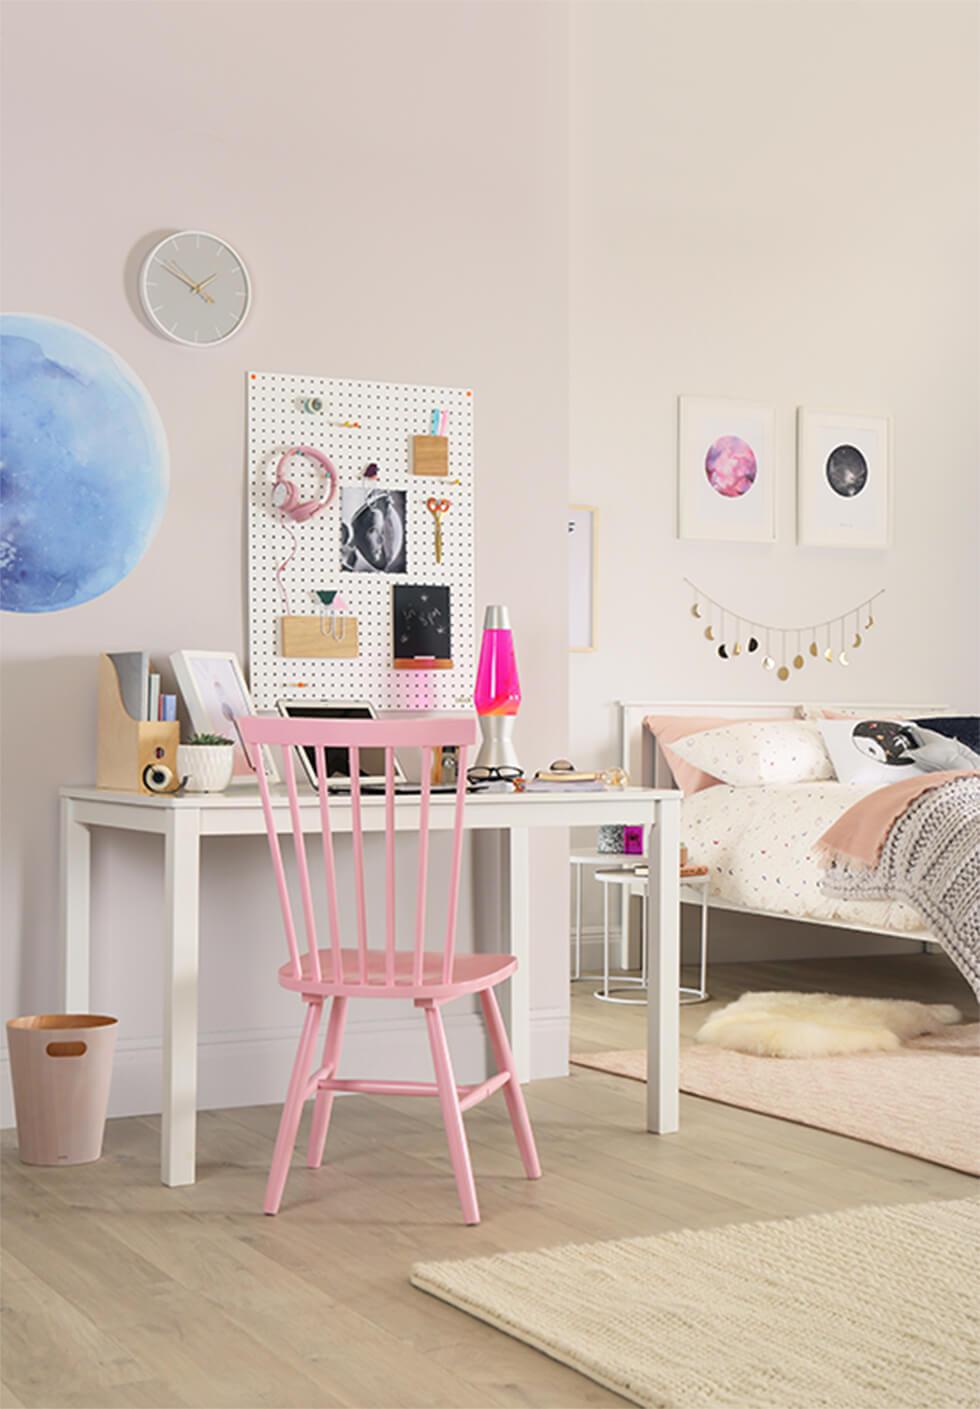 Pink Windsor chair in a soft white bedroom